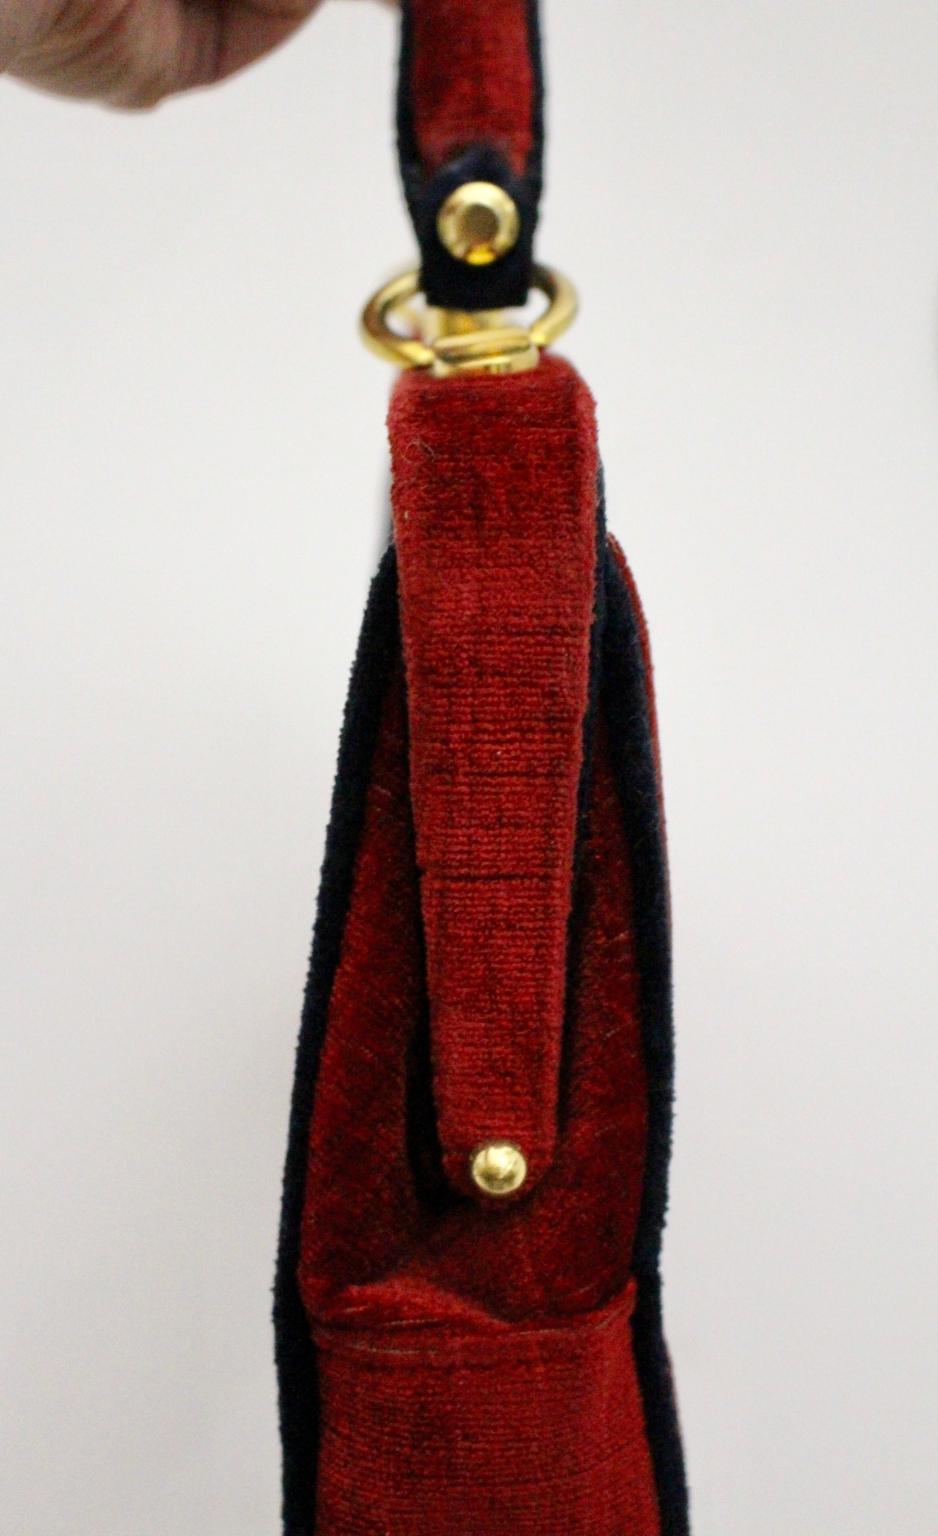 Velvet Vintage Handle Bag in the style of Roberta di Camerino 1960s, Italy For Sale 5